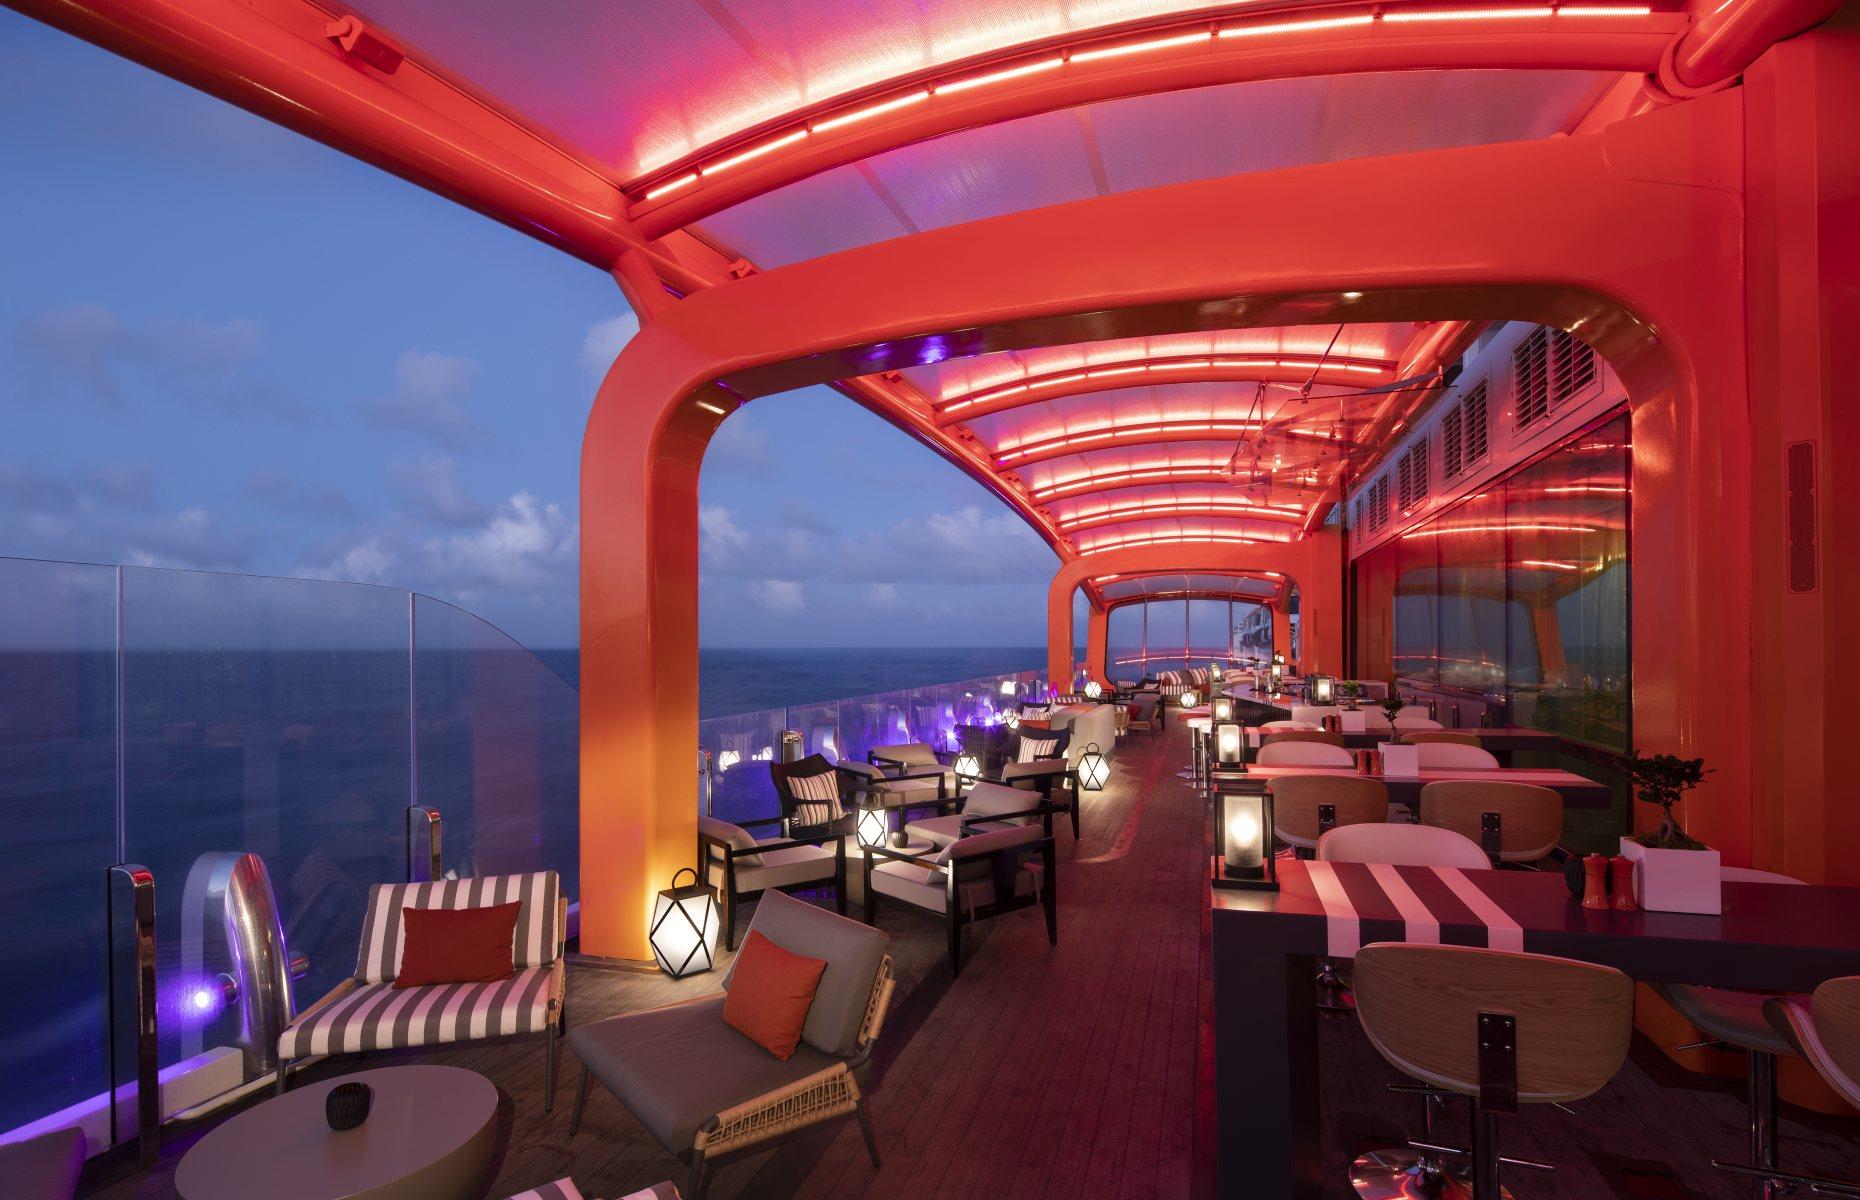 <p>Okay, not the type ridden by Aladdin. We’re talking about Celebrity Cruises’ Magic Carpet – a cantilevered platform which appears to float in thin air, and which glides up and down the side of Celebrity Edge, one of the cruise line’s most luxurious ships. Depending on what level it stops at, the Magic Carpet can become a restaurant, bar or nightclub, although the one constant is breathtaking views.</p>